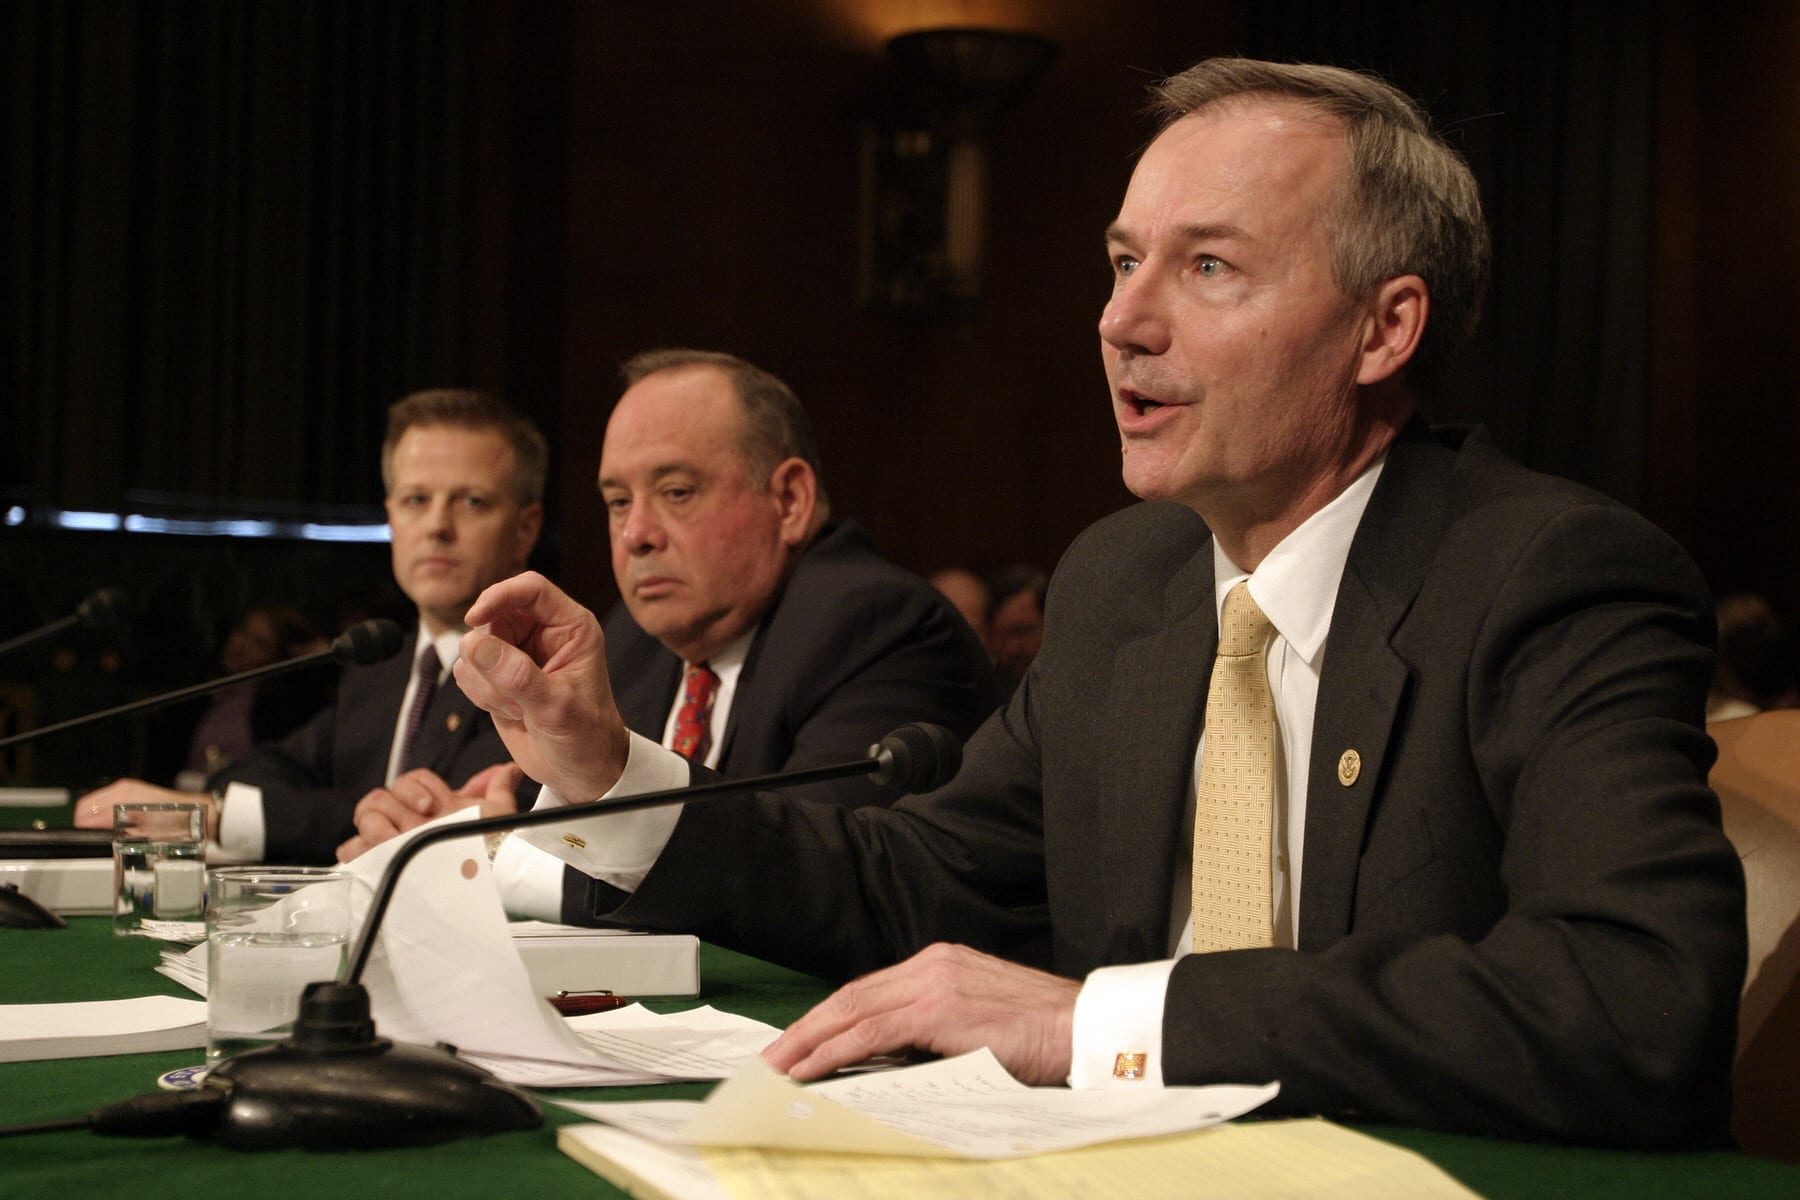 Asa Hutchinson, Undersecretary of Homeland Security for Border and Transportation Security Directorate; Eduardo Aguirre, director of the U.S. Citizenship and Immigration Services at the Homeland Security Department; Steven Law, deputy secretary of Labor; appear before a Senate Judiciary hearing.